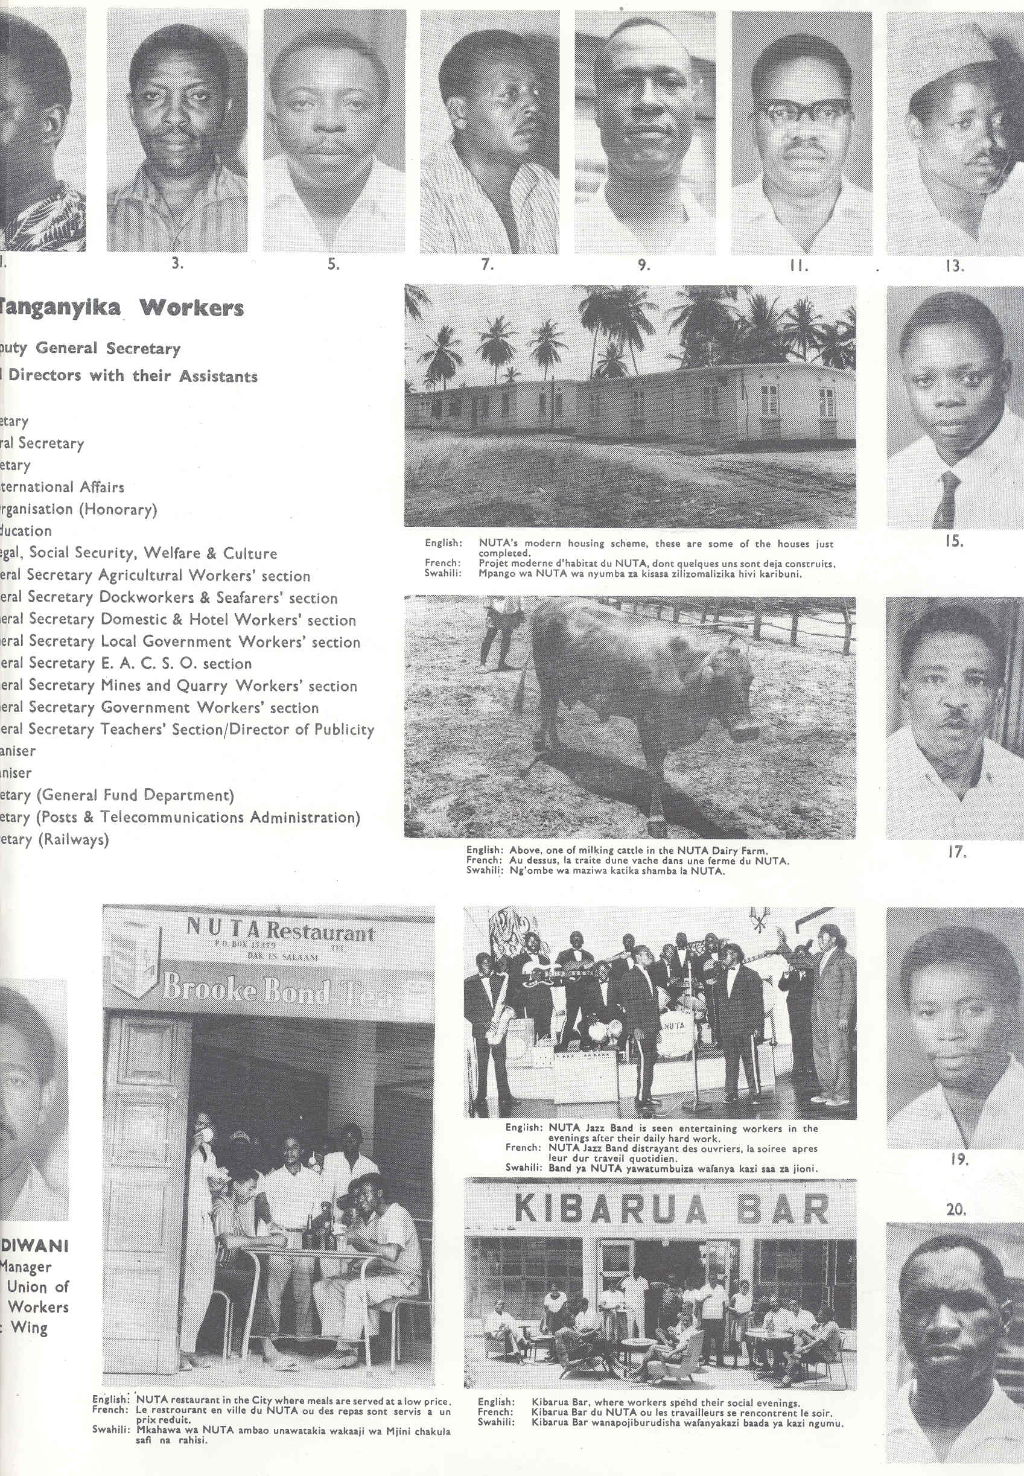 Poster showing the officials and social facilities of the National Union of Tanganyika Workers, c1965